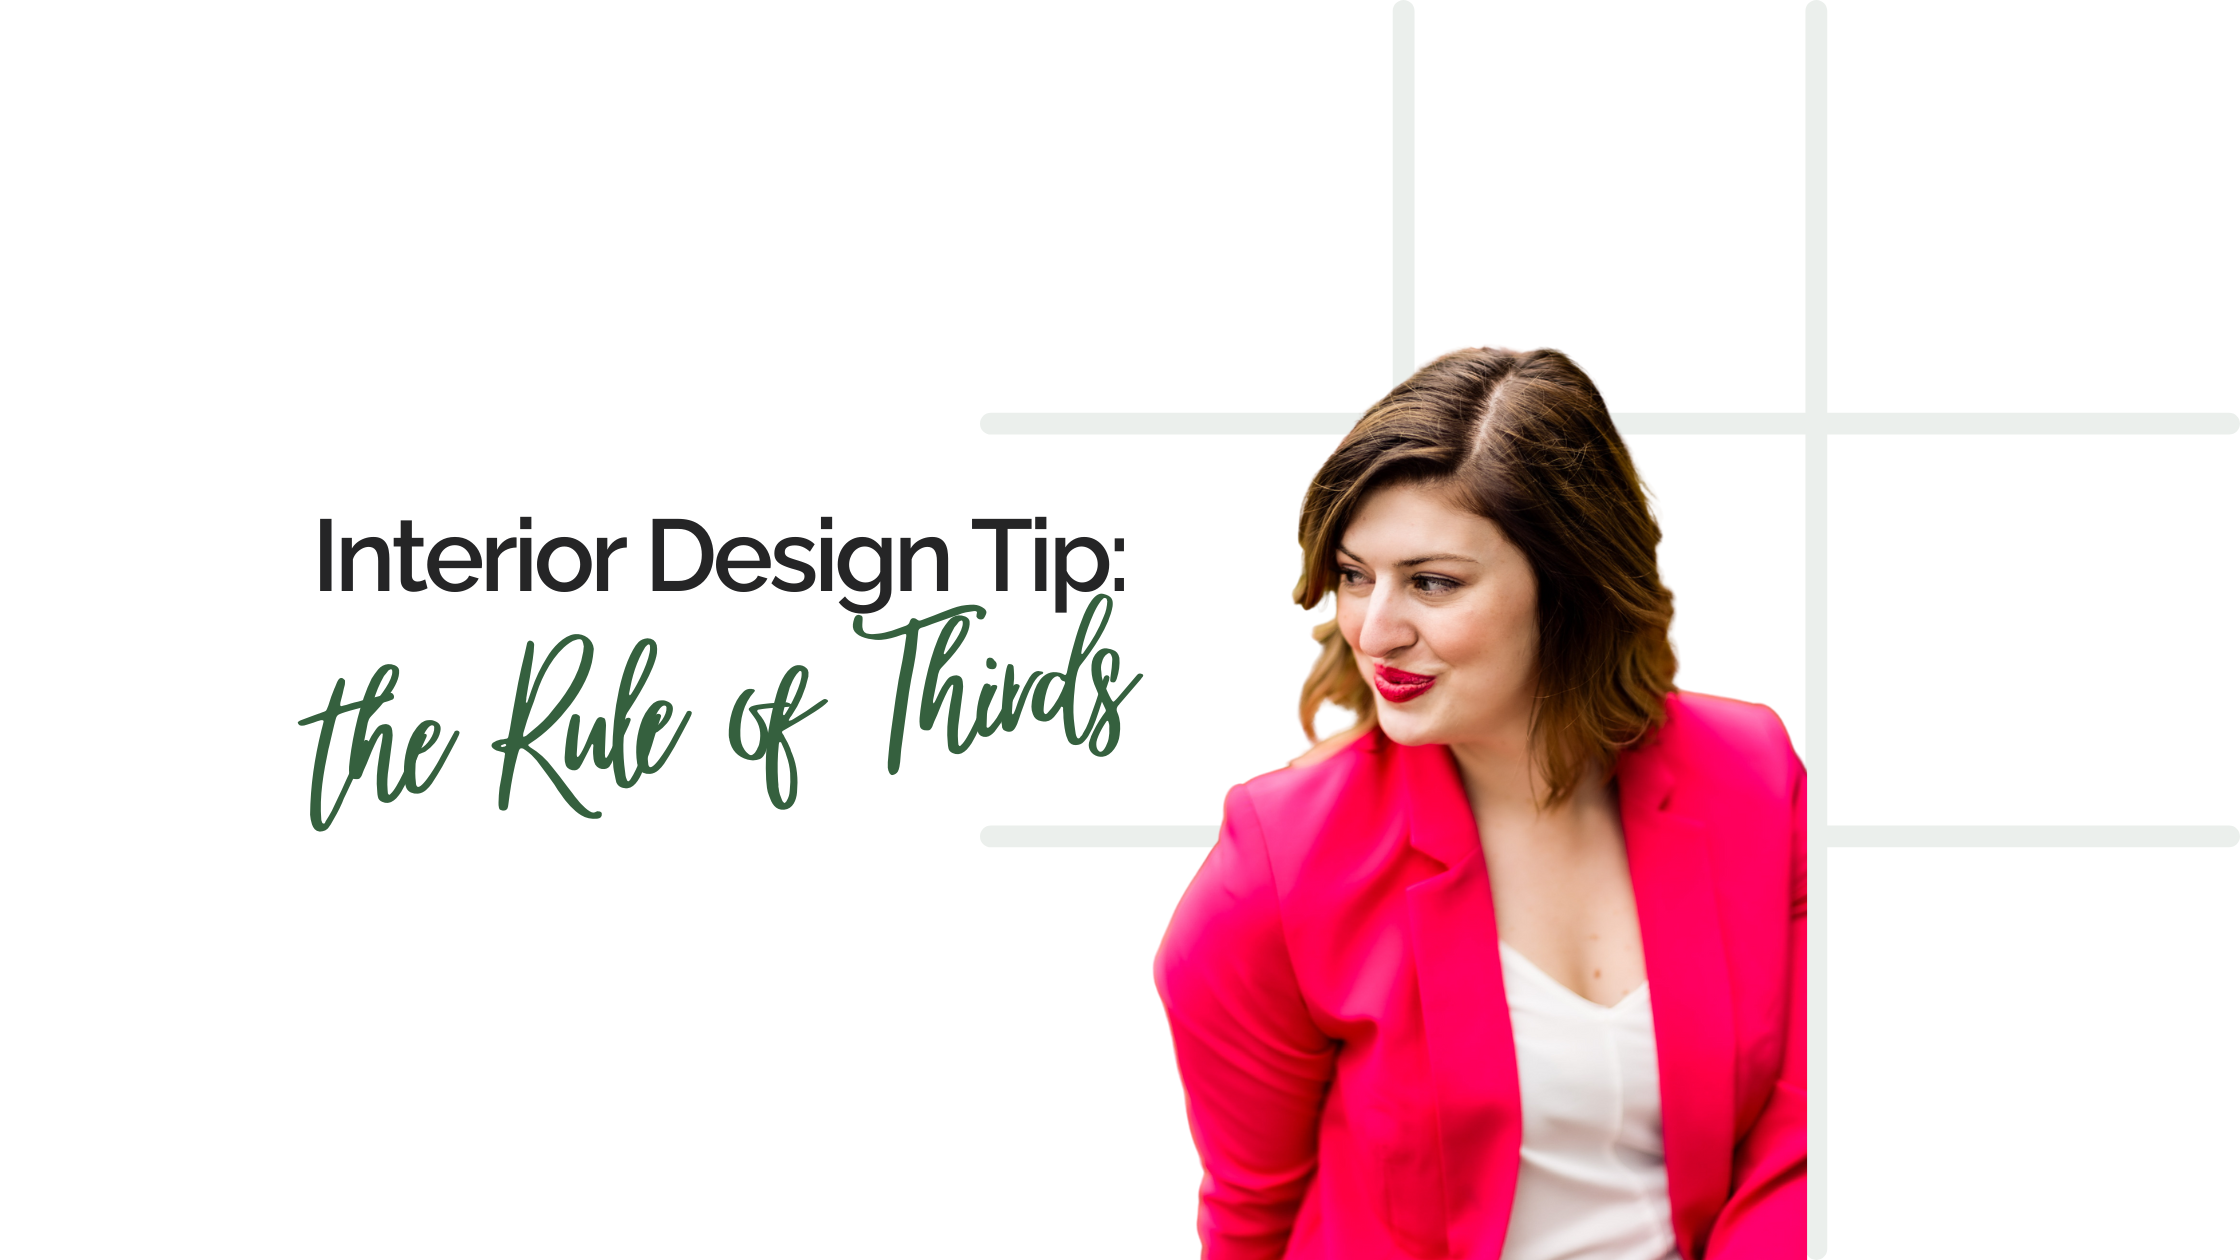 Interior Design: The Rule of Thirds